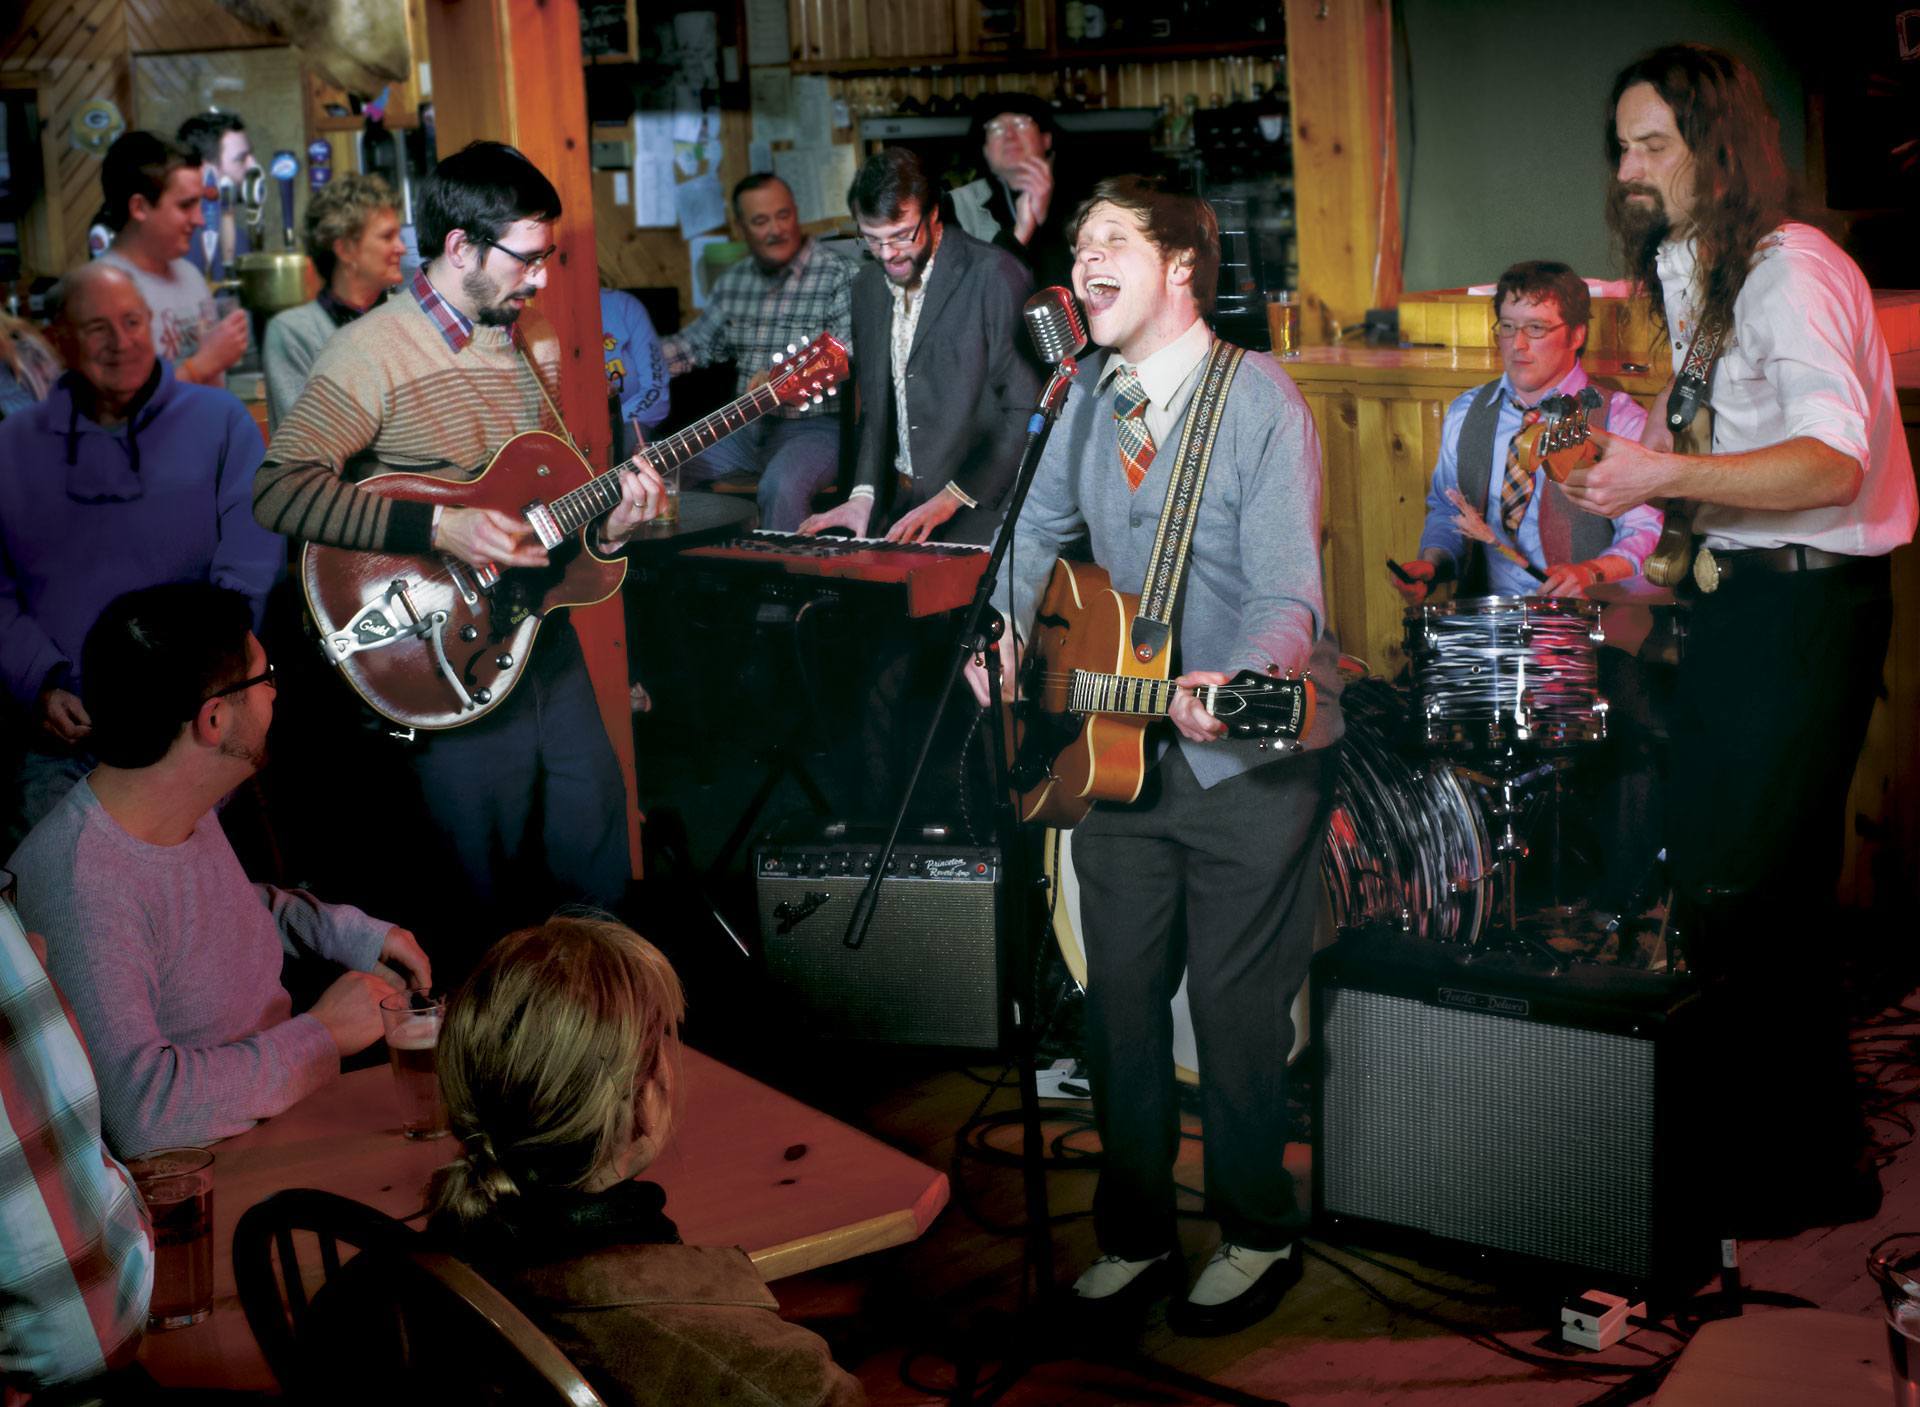 A live band performing